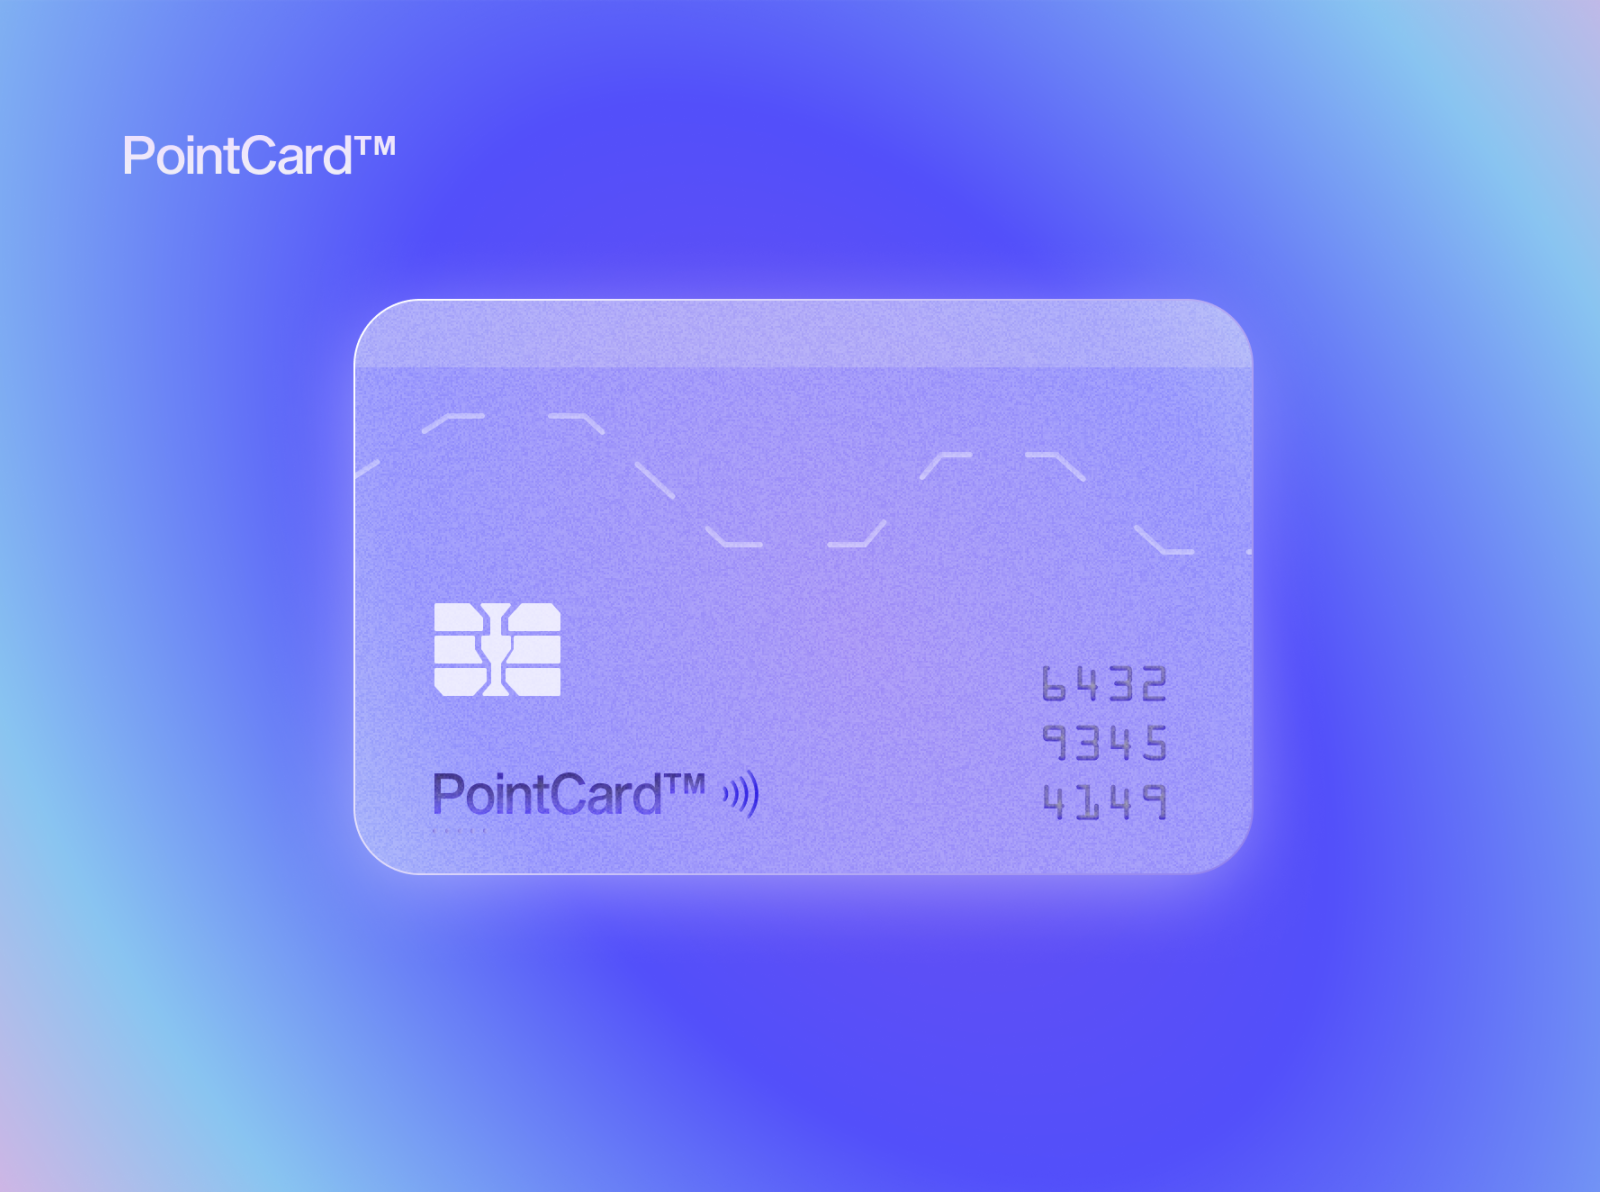 Pointcard Future Payment Card By Hyogyeom Kim On Dribbble